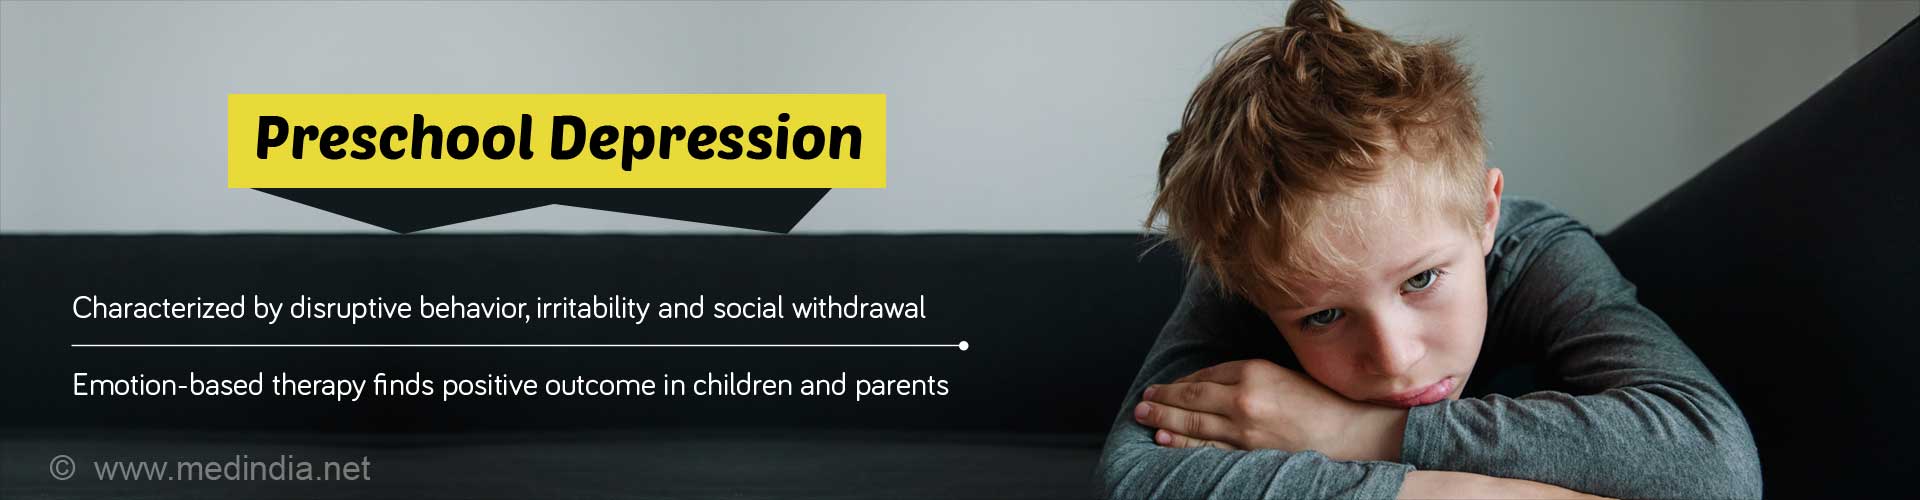 Preschool Depression. Characterized by disruptive behavior, irritability and social withdrawal. Emotion-based therapy finds positive outcome in children and parents.